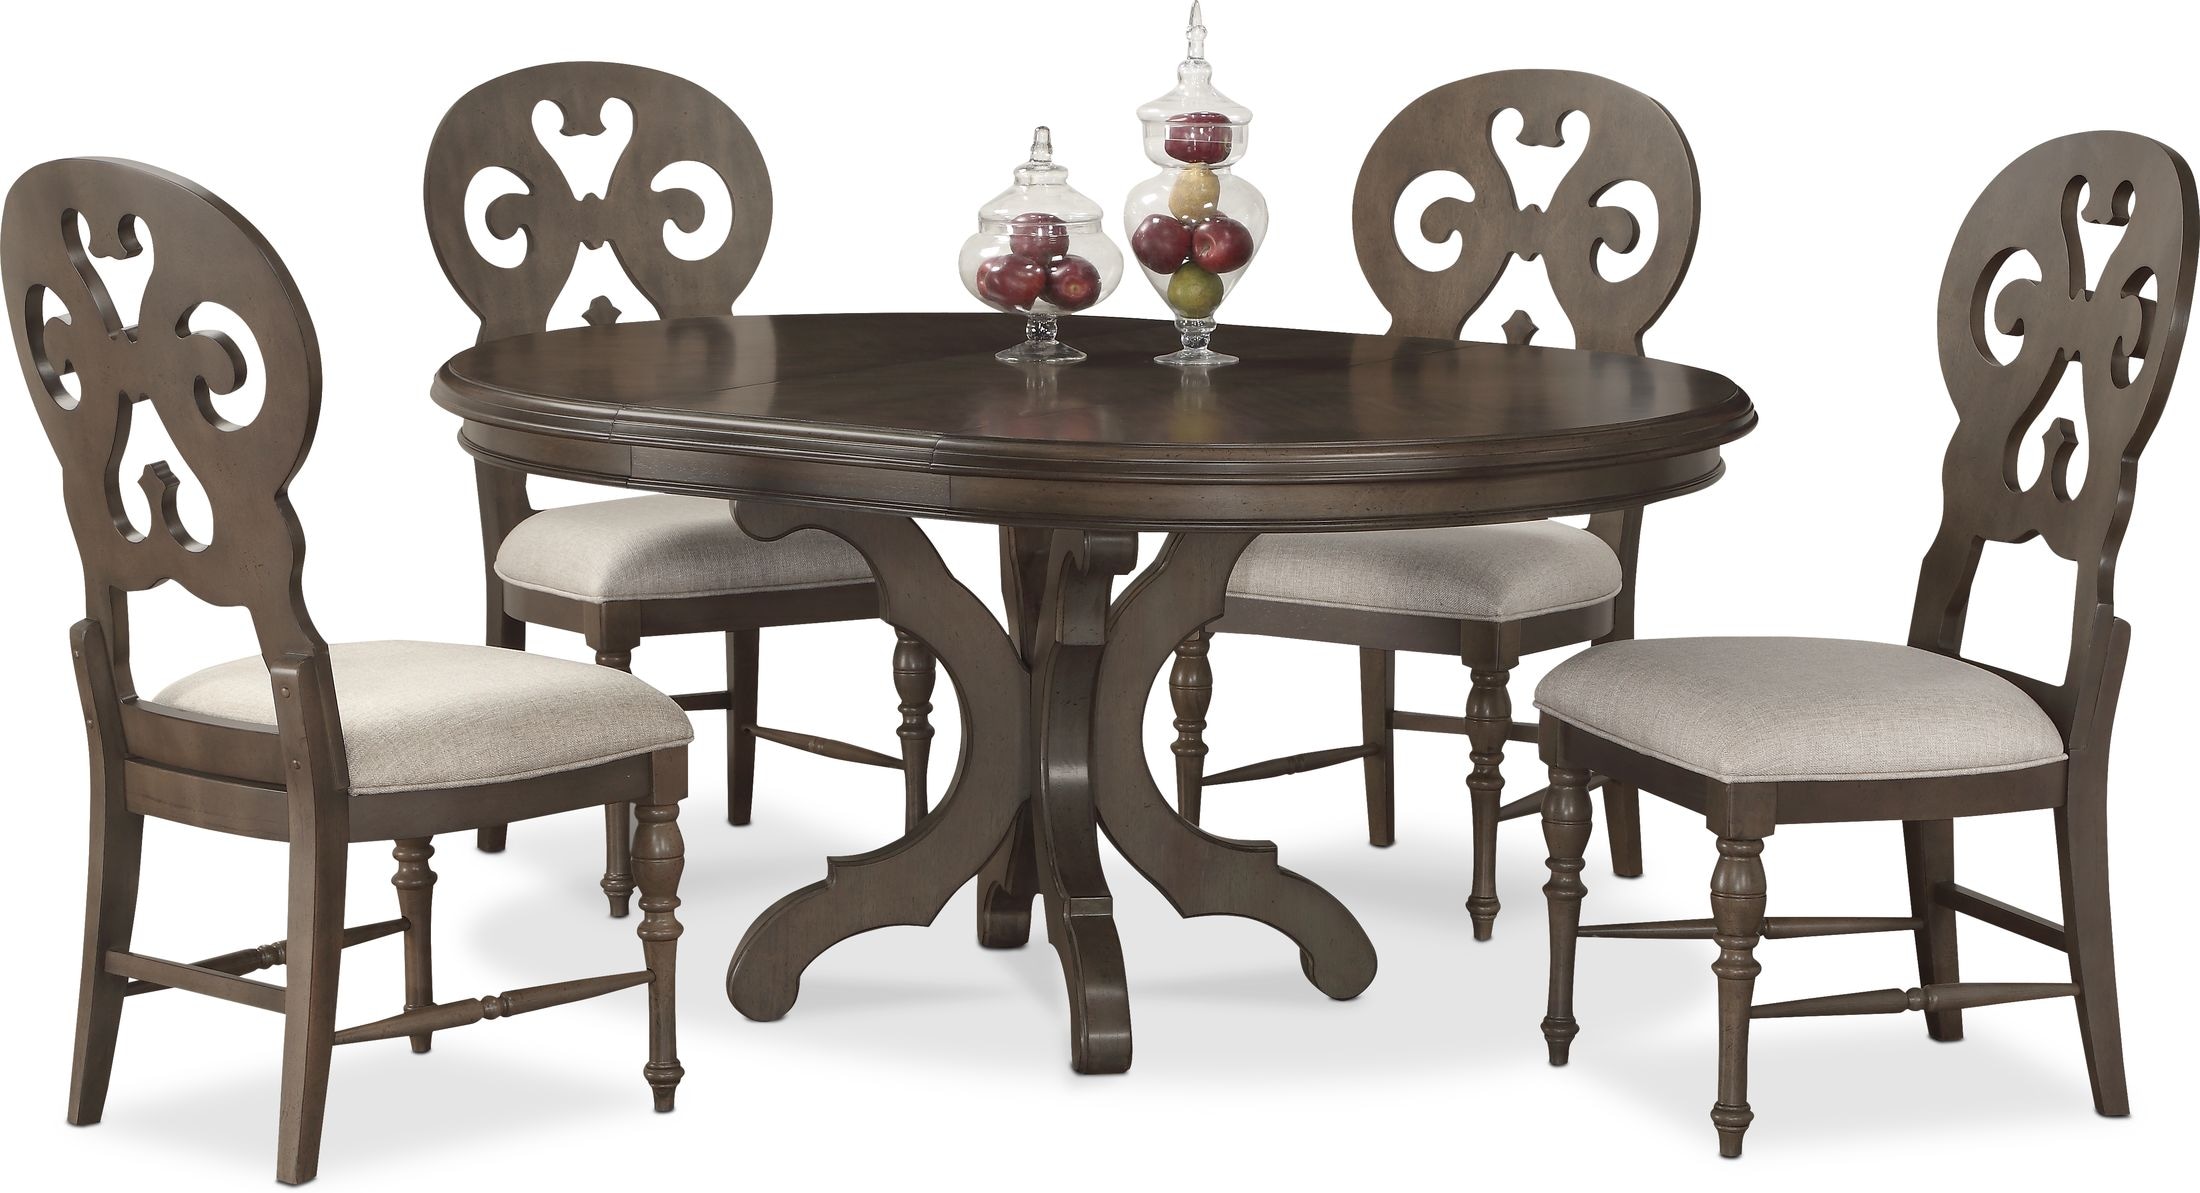 Charleston Round Dining Table And 4 Scroll Back Side Chairs American Signature Furniture